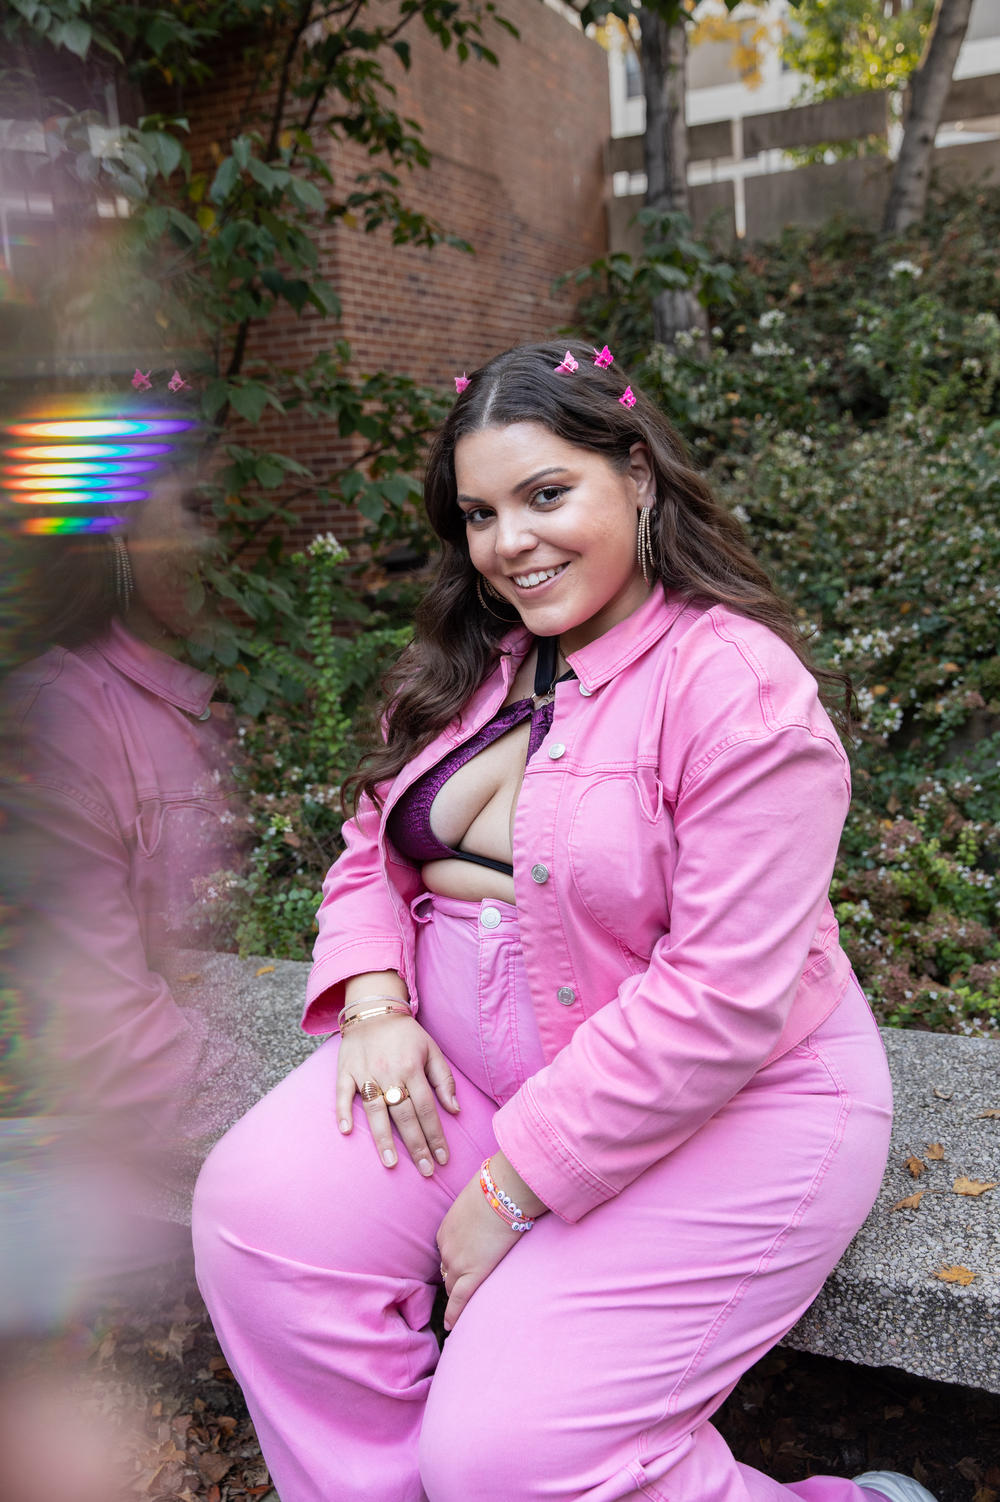 Elle Baez, a Latina singer who makes pop-soul music with a focus on self-love and body positivity, at Philly FatCon.